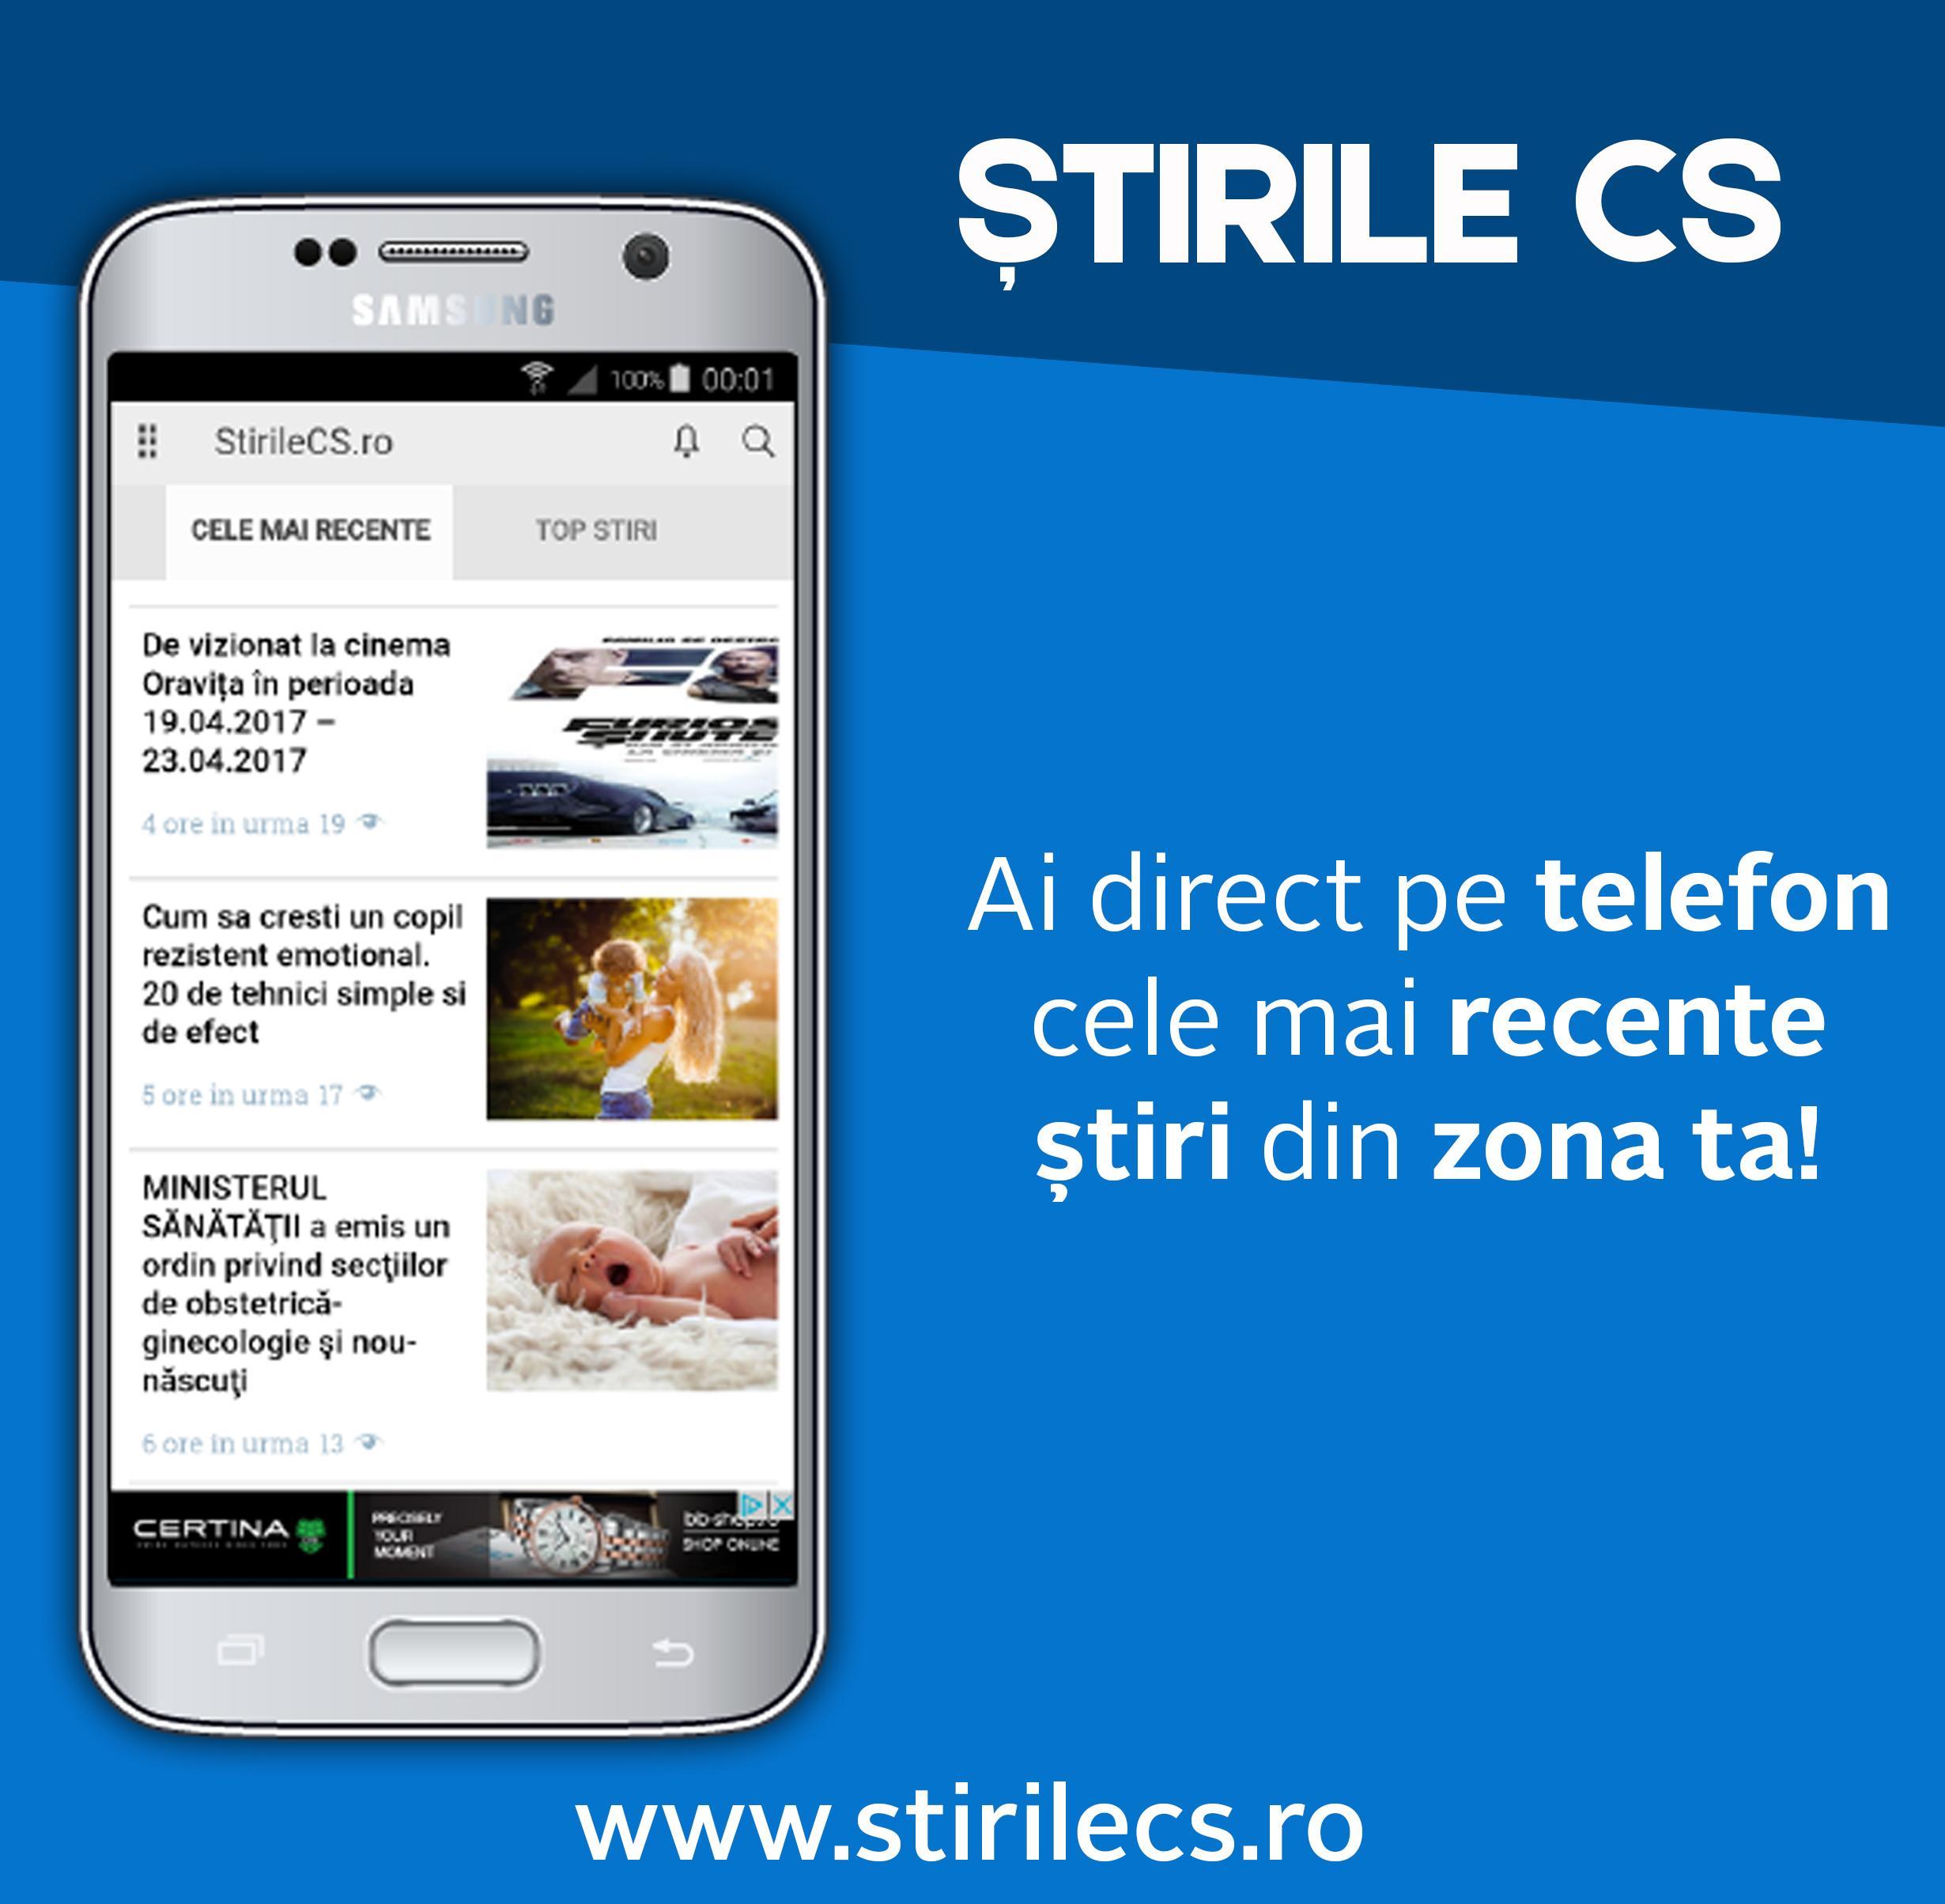 Stirile Cs For Android Apk Download